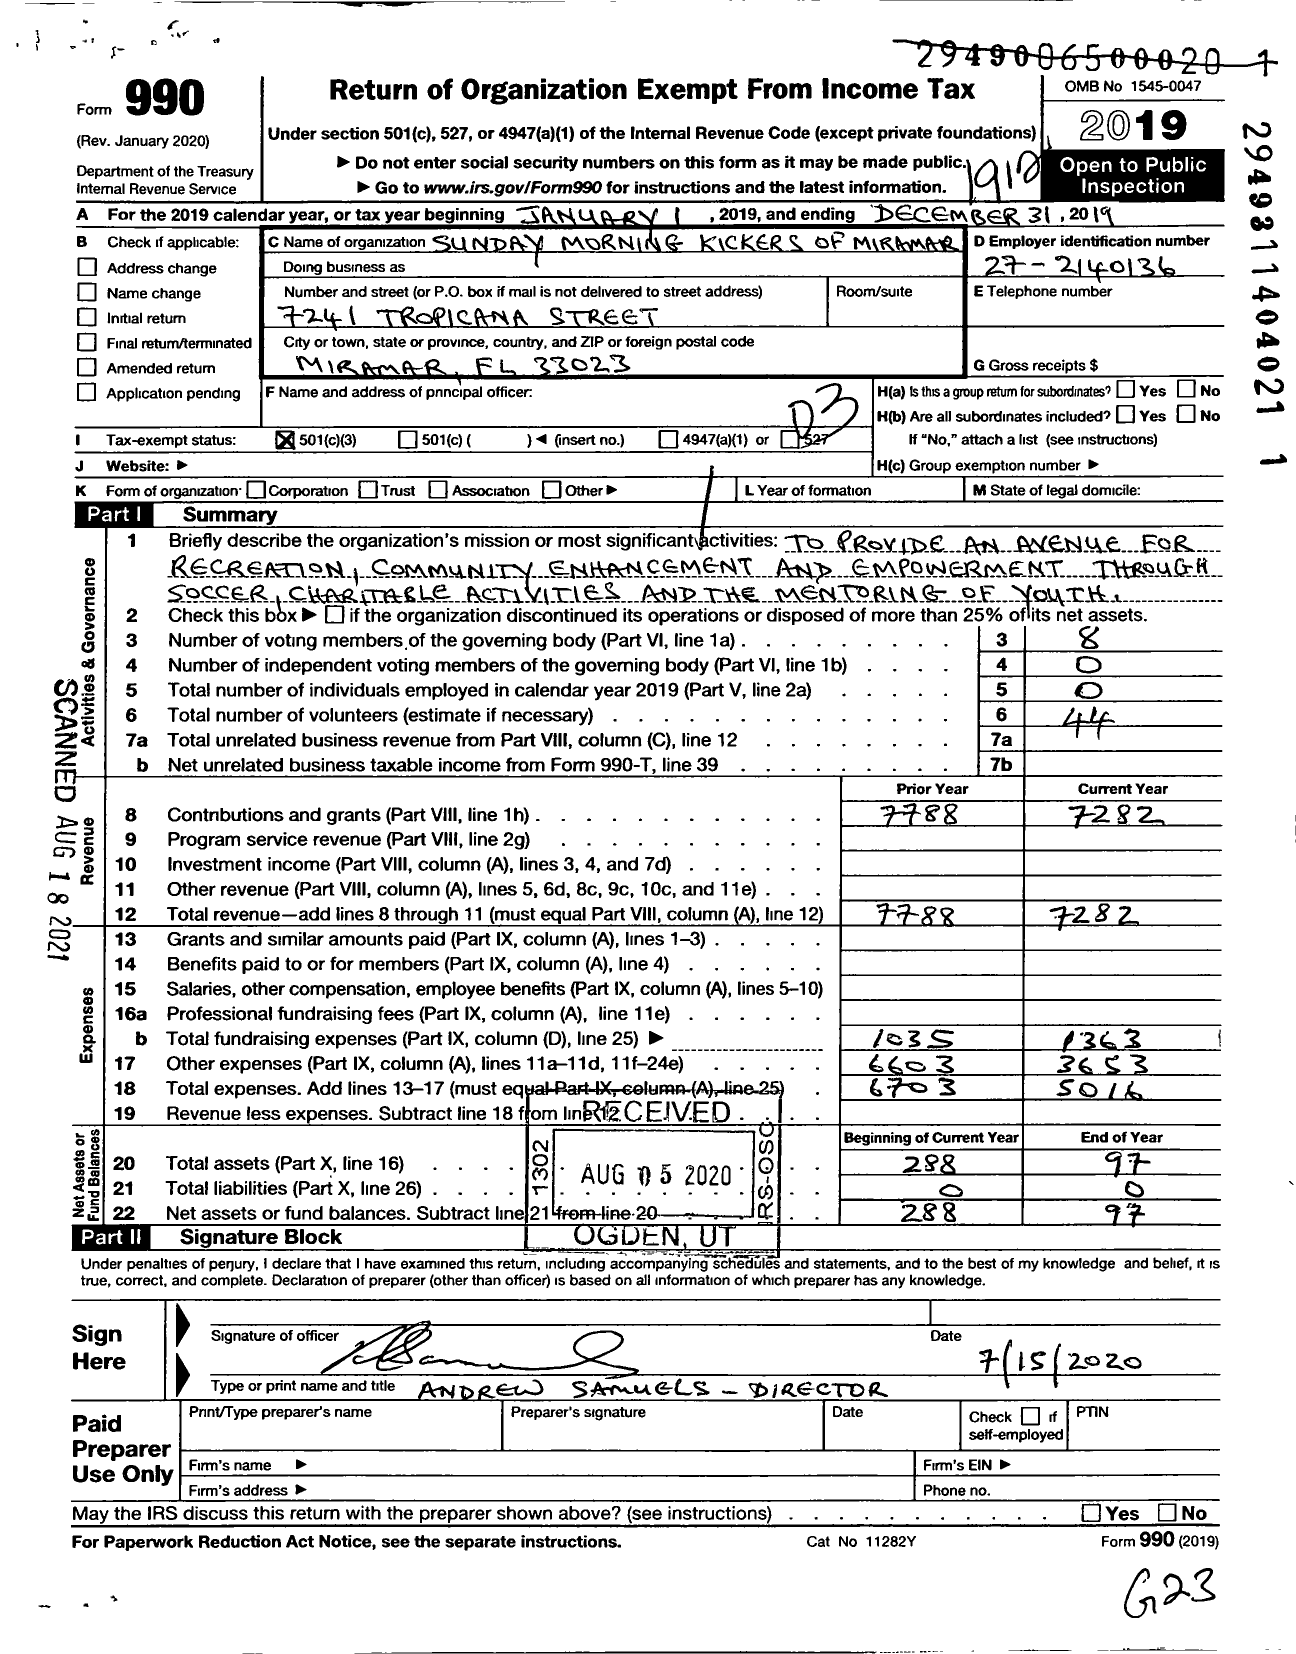 Image of first page of 2019 Form 990 for Sunday Morning Kickers of Miramar Incorporated